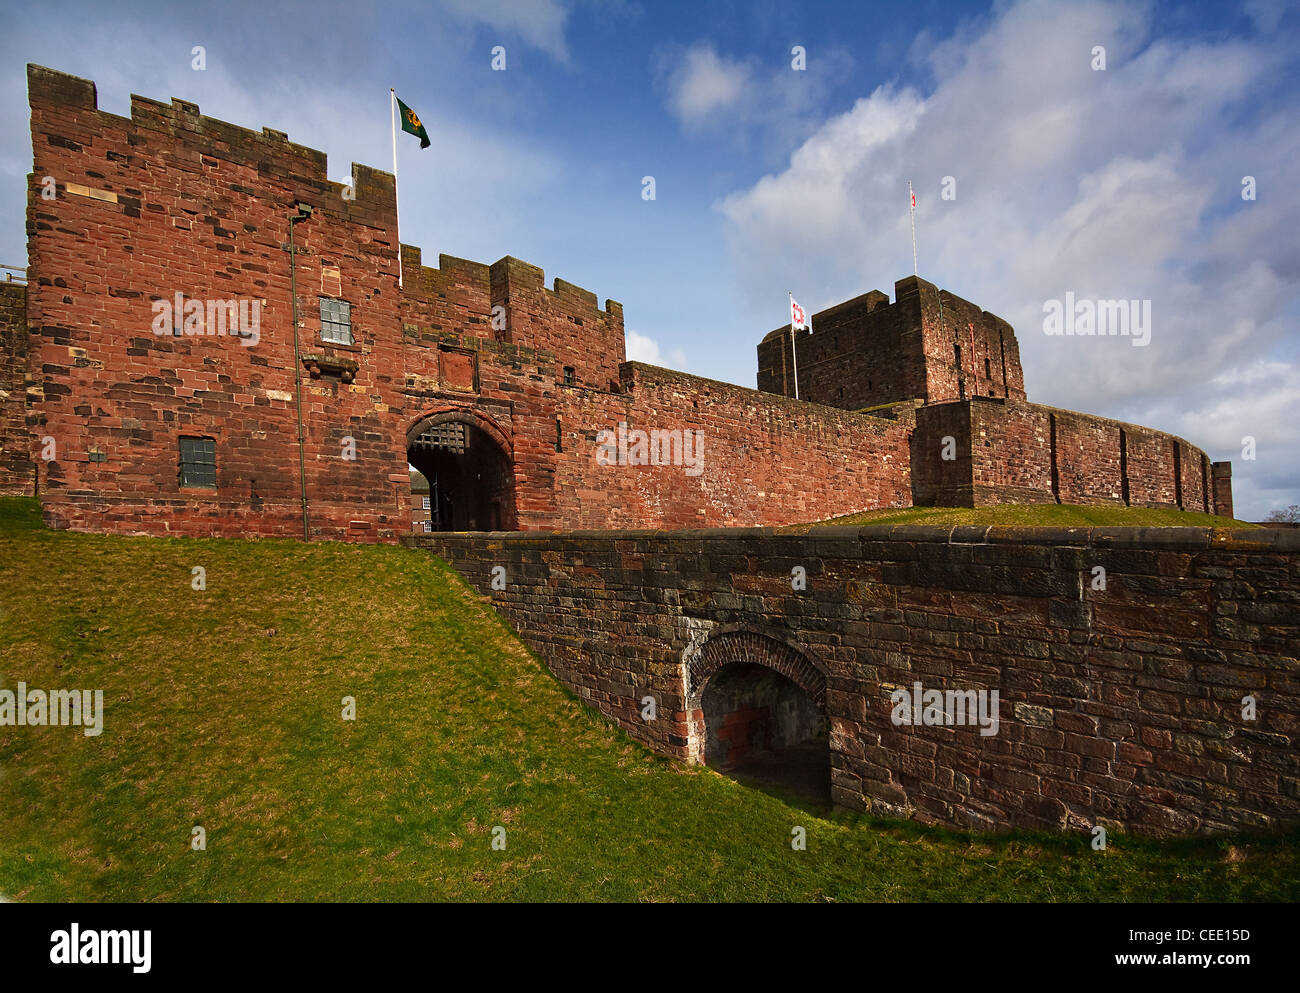 Carlisle Castle exterior from the front with the keep and bridge over the moat to the main entrance gate with portcullis Stock Photo